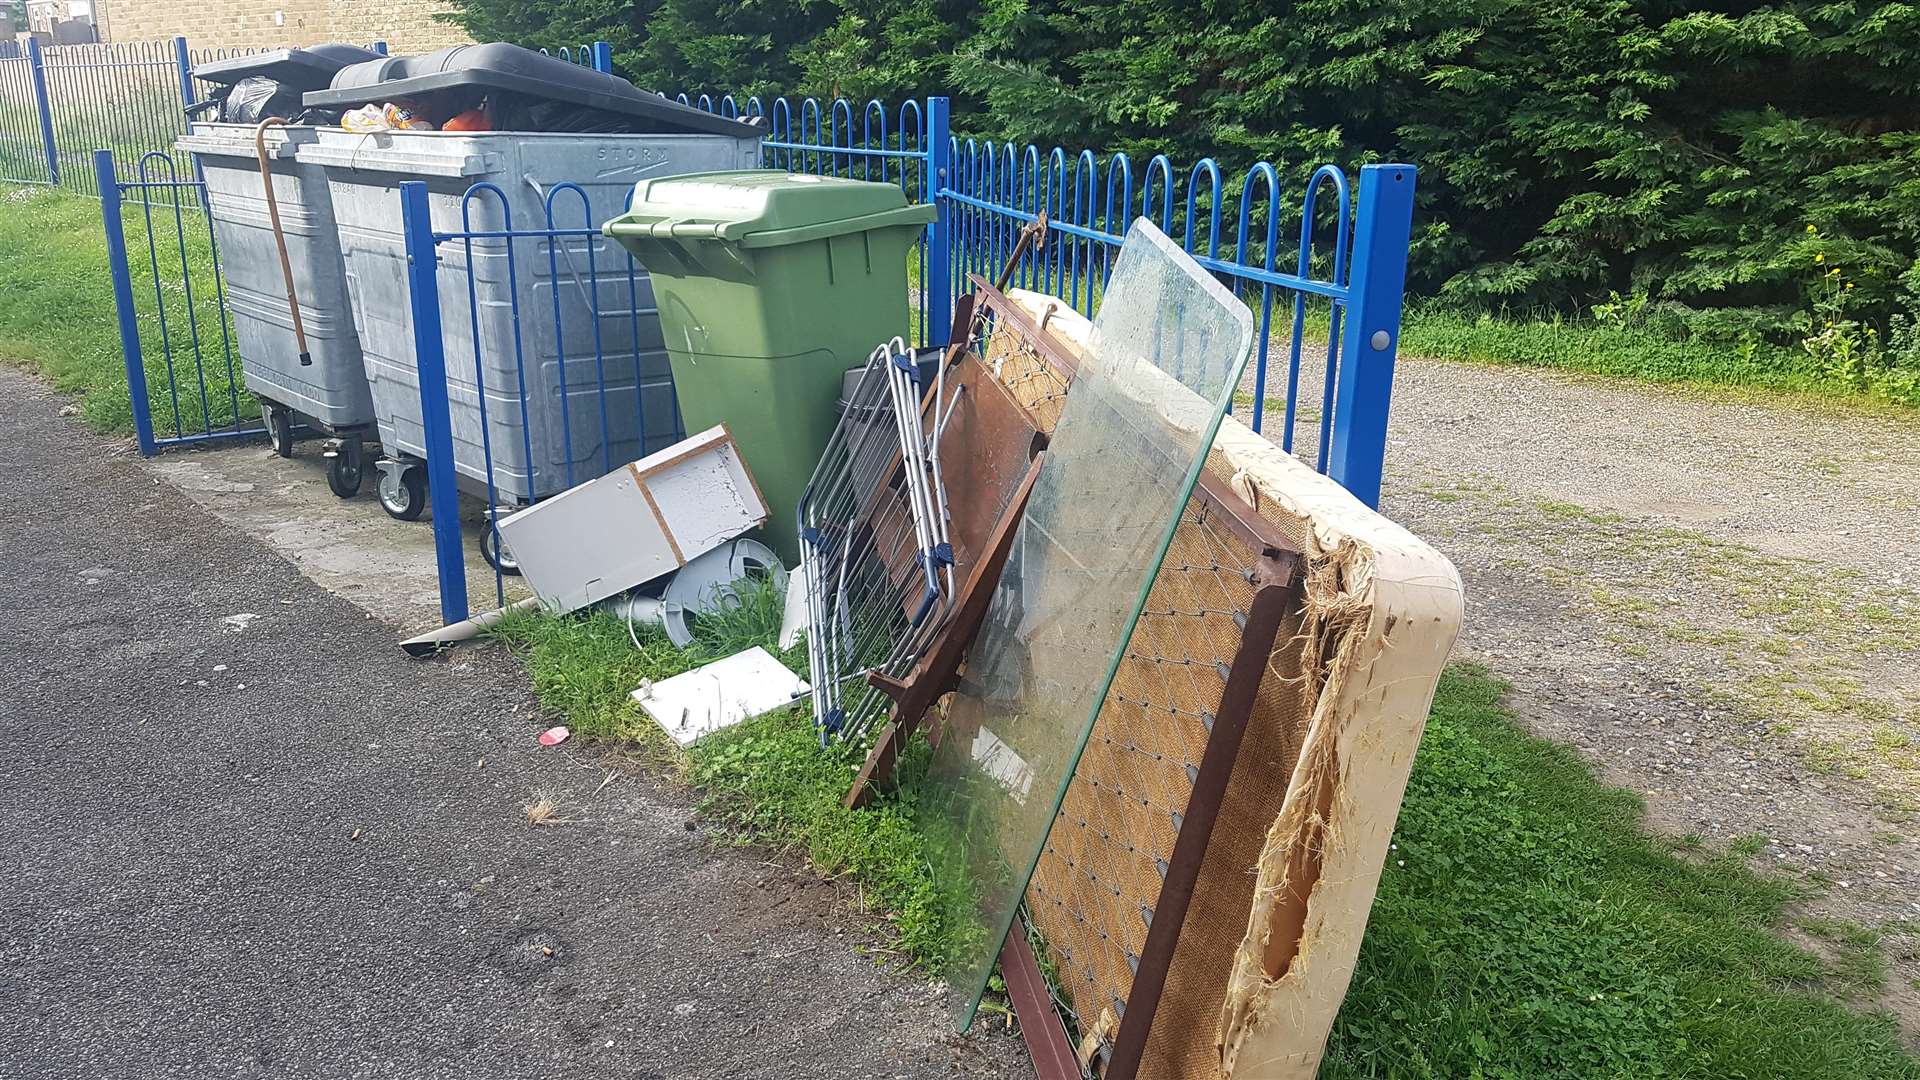 The rubbish bins at Kenilworth Court, Sittingbourne where the bearded dragon was found. Picture: RSPCA